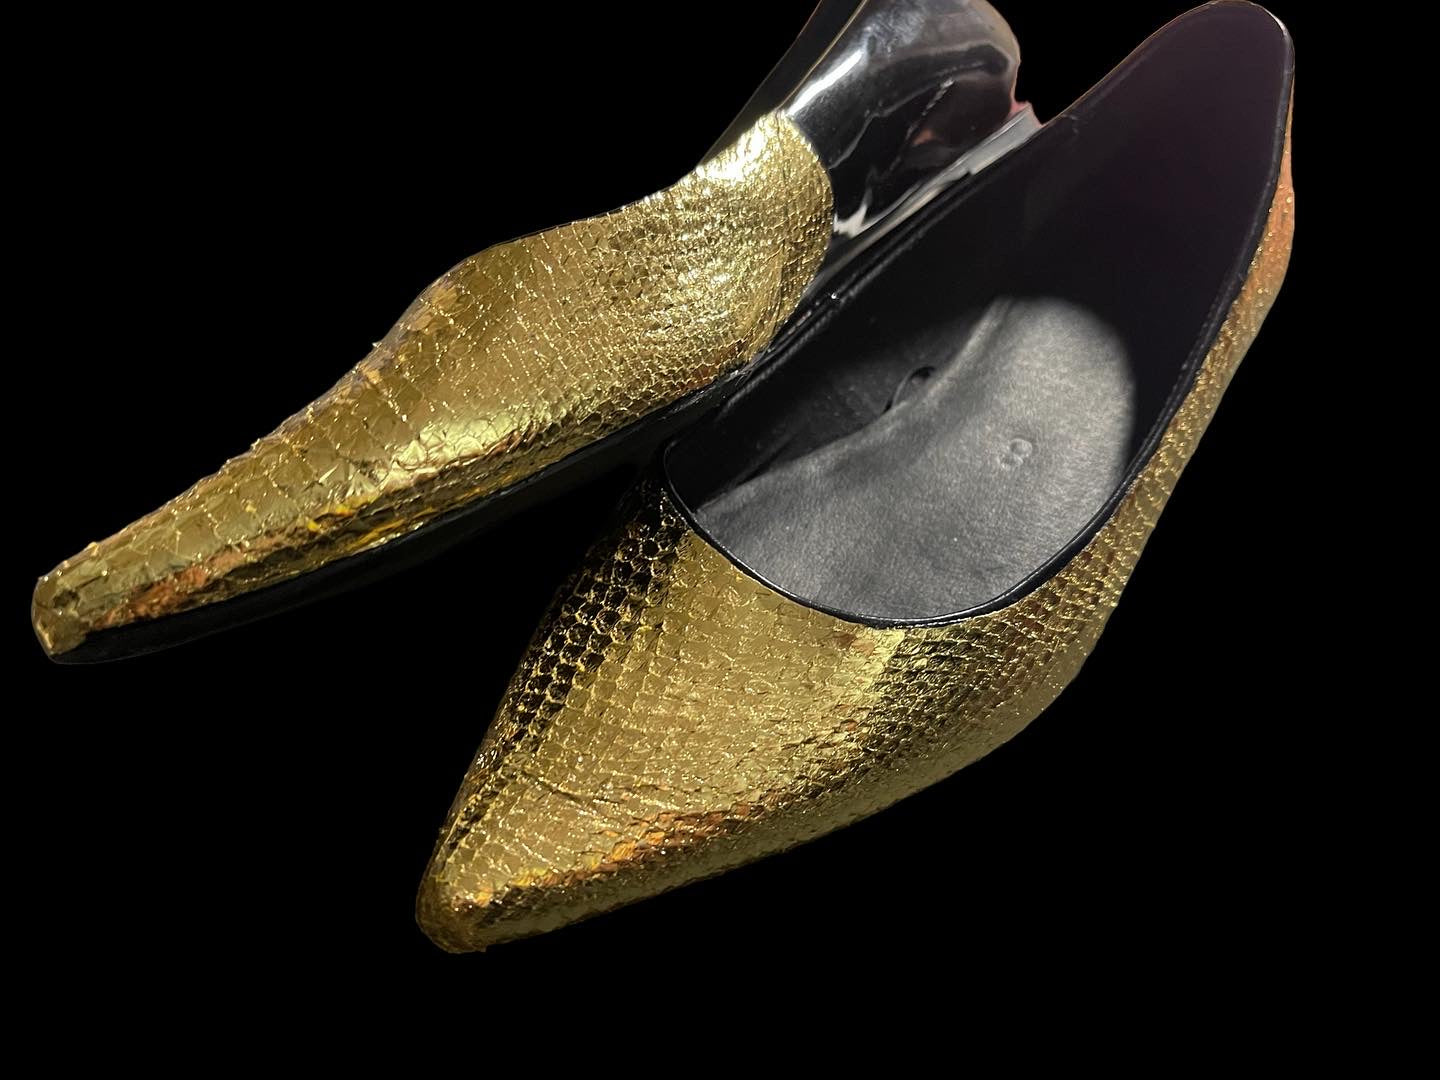 Fish Skin Leather Shoes in Gold - Size 8